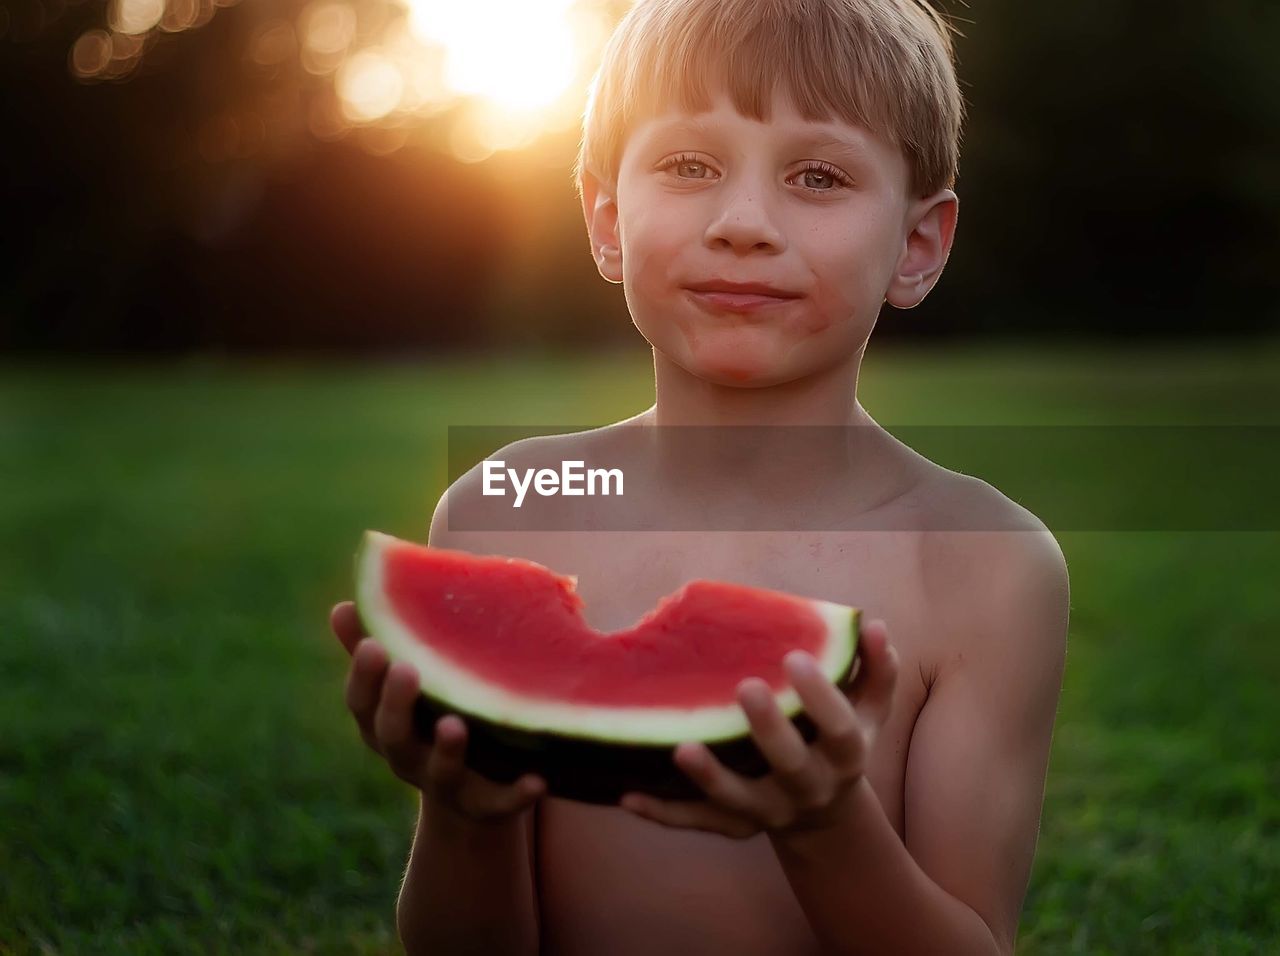 Portrait of shirtless boy eating watermelon during sunset